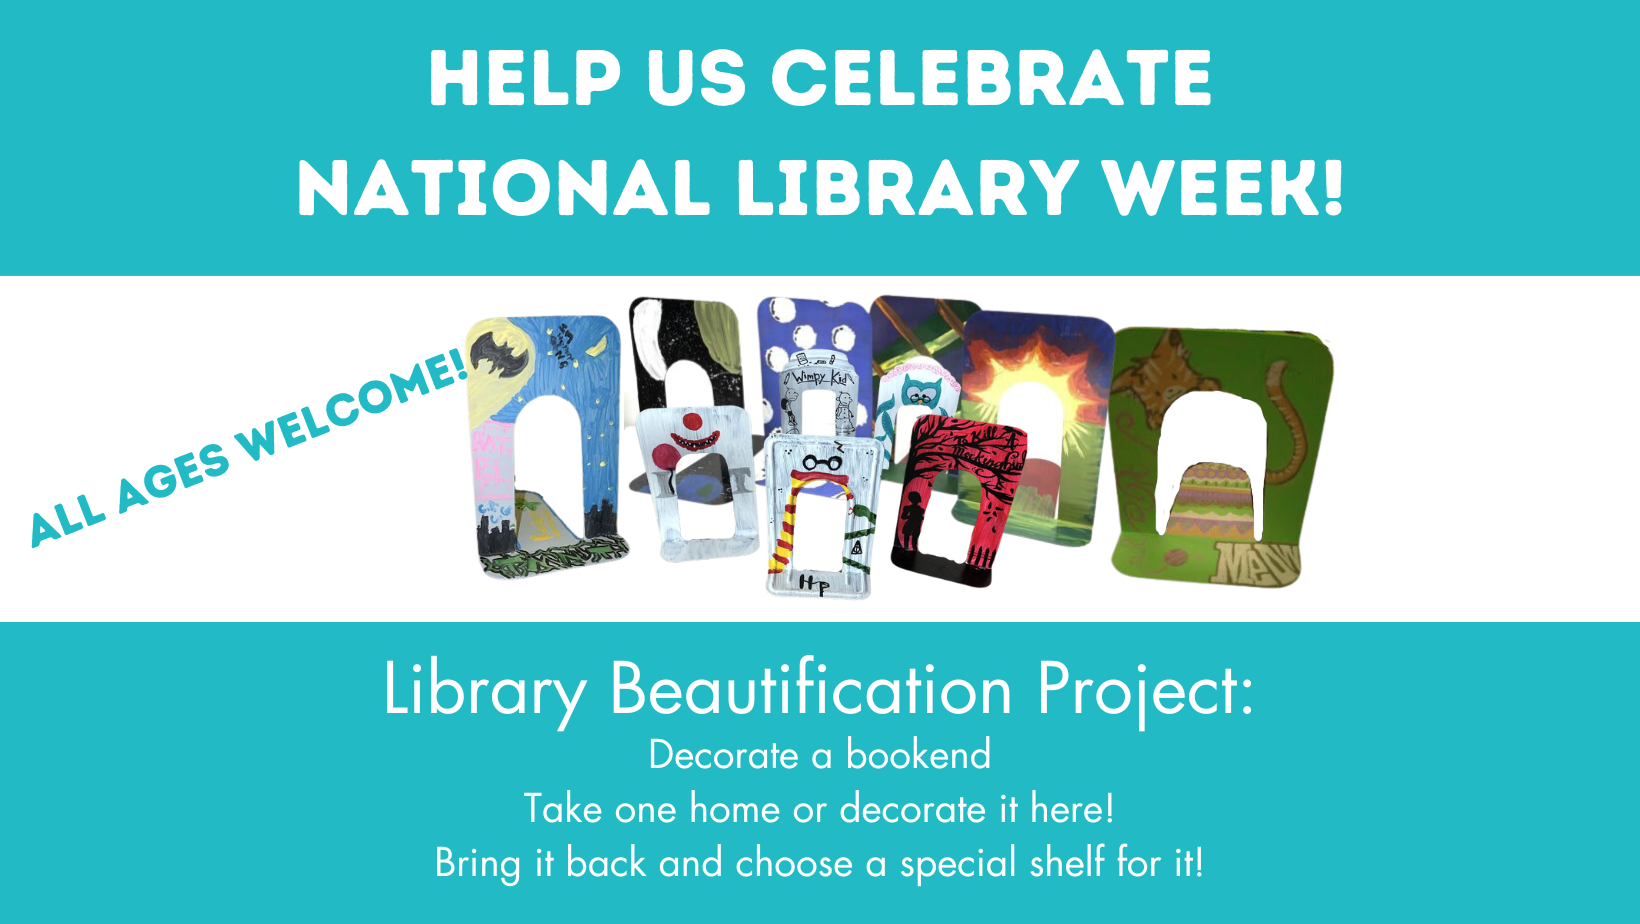 Decorate a bookend for National Library Week!